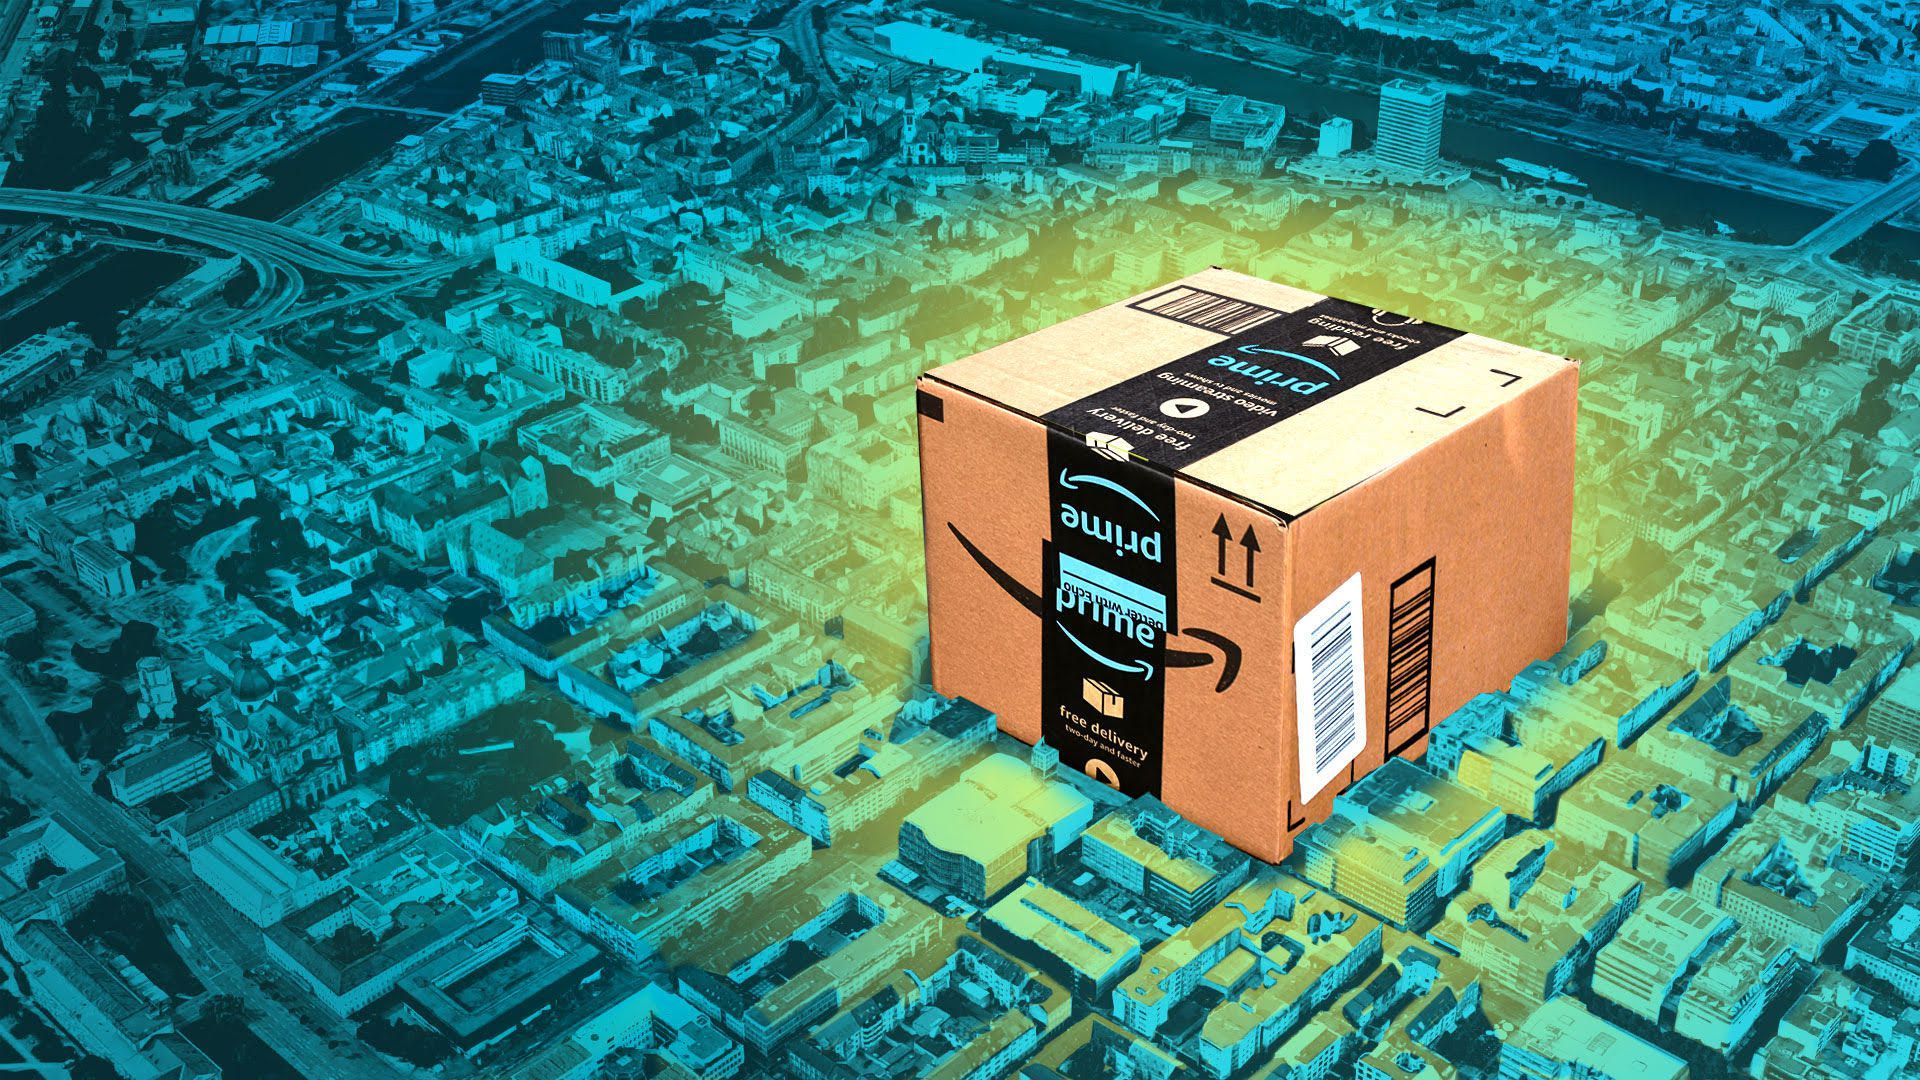 Illustration of an Amazon package in a city